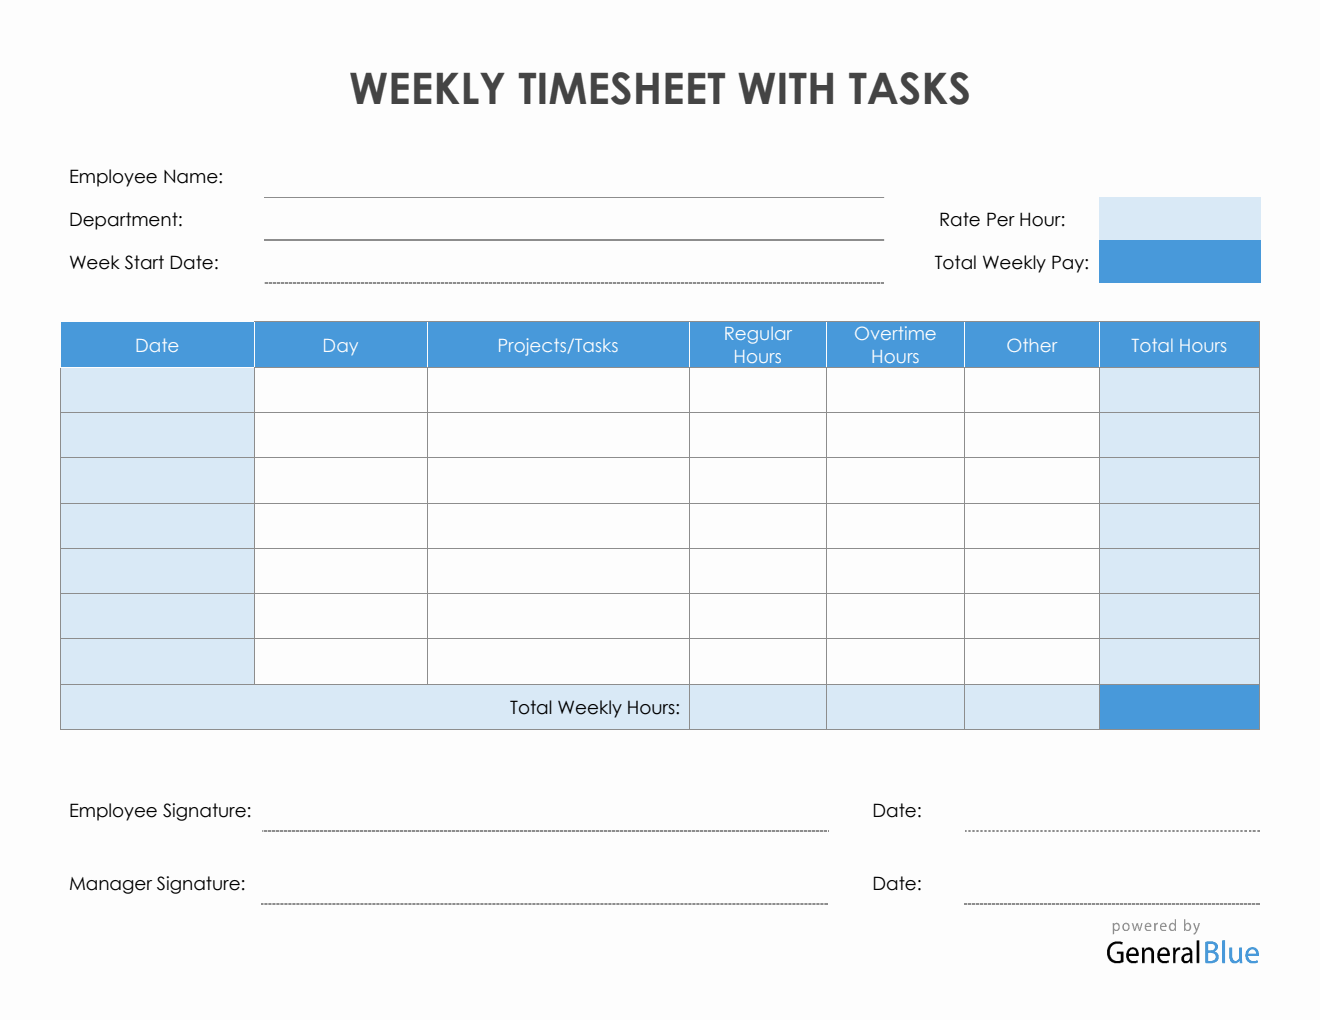 Weekly Timesheet With Tasks in Word